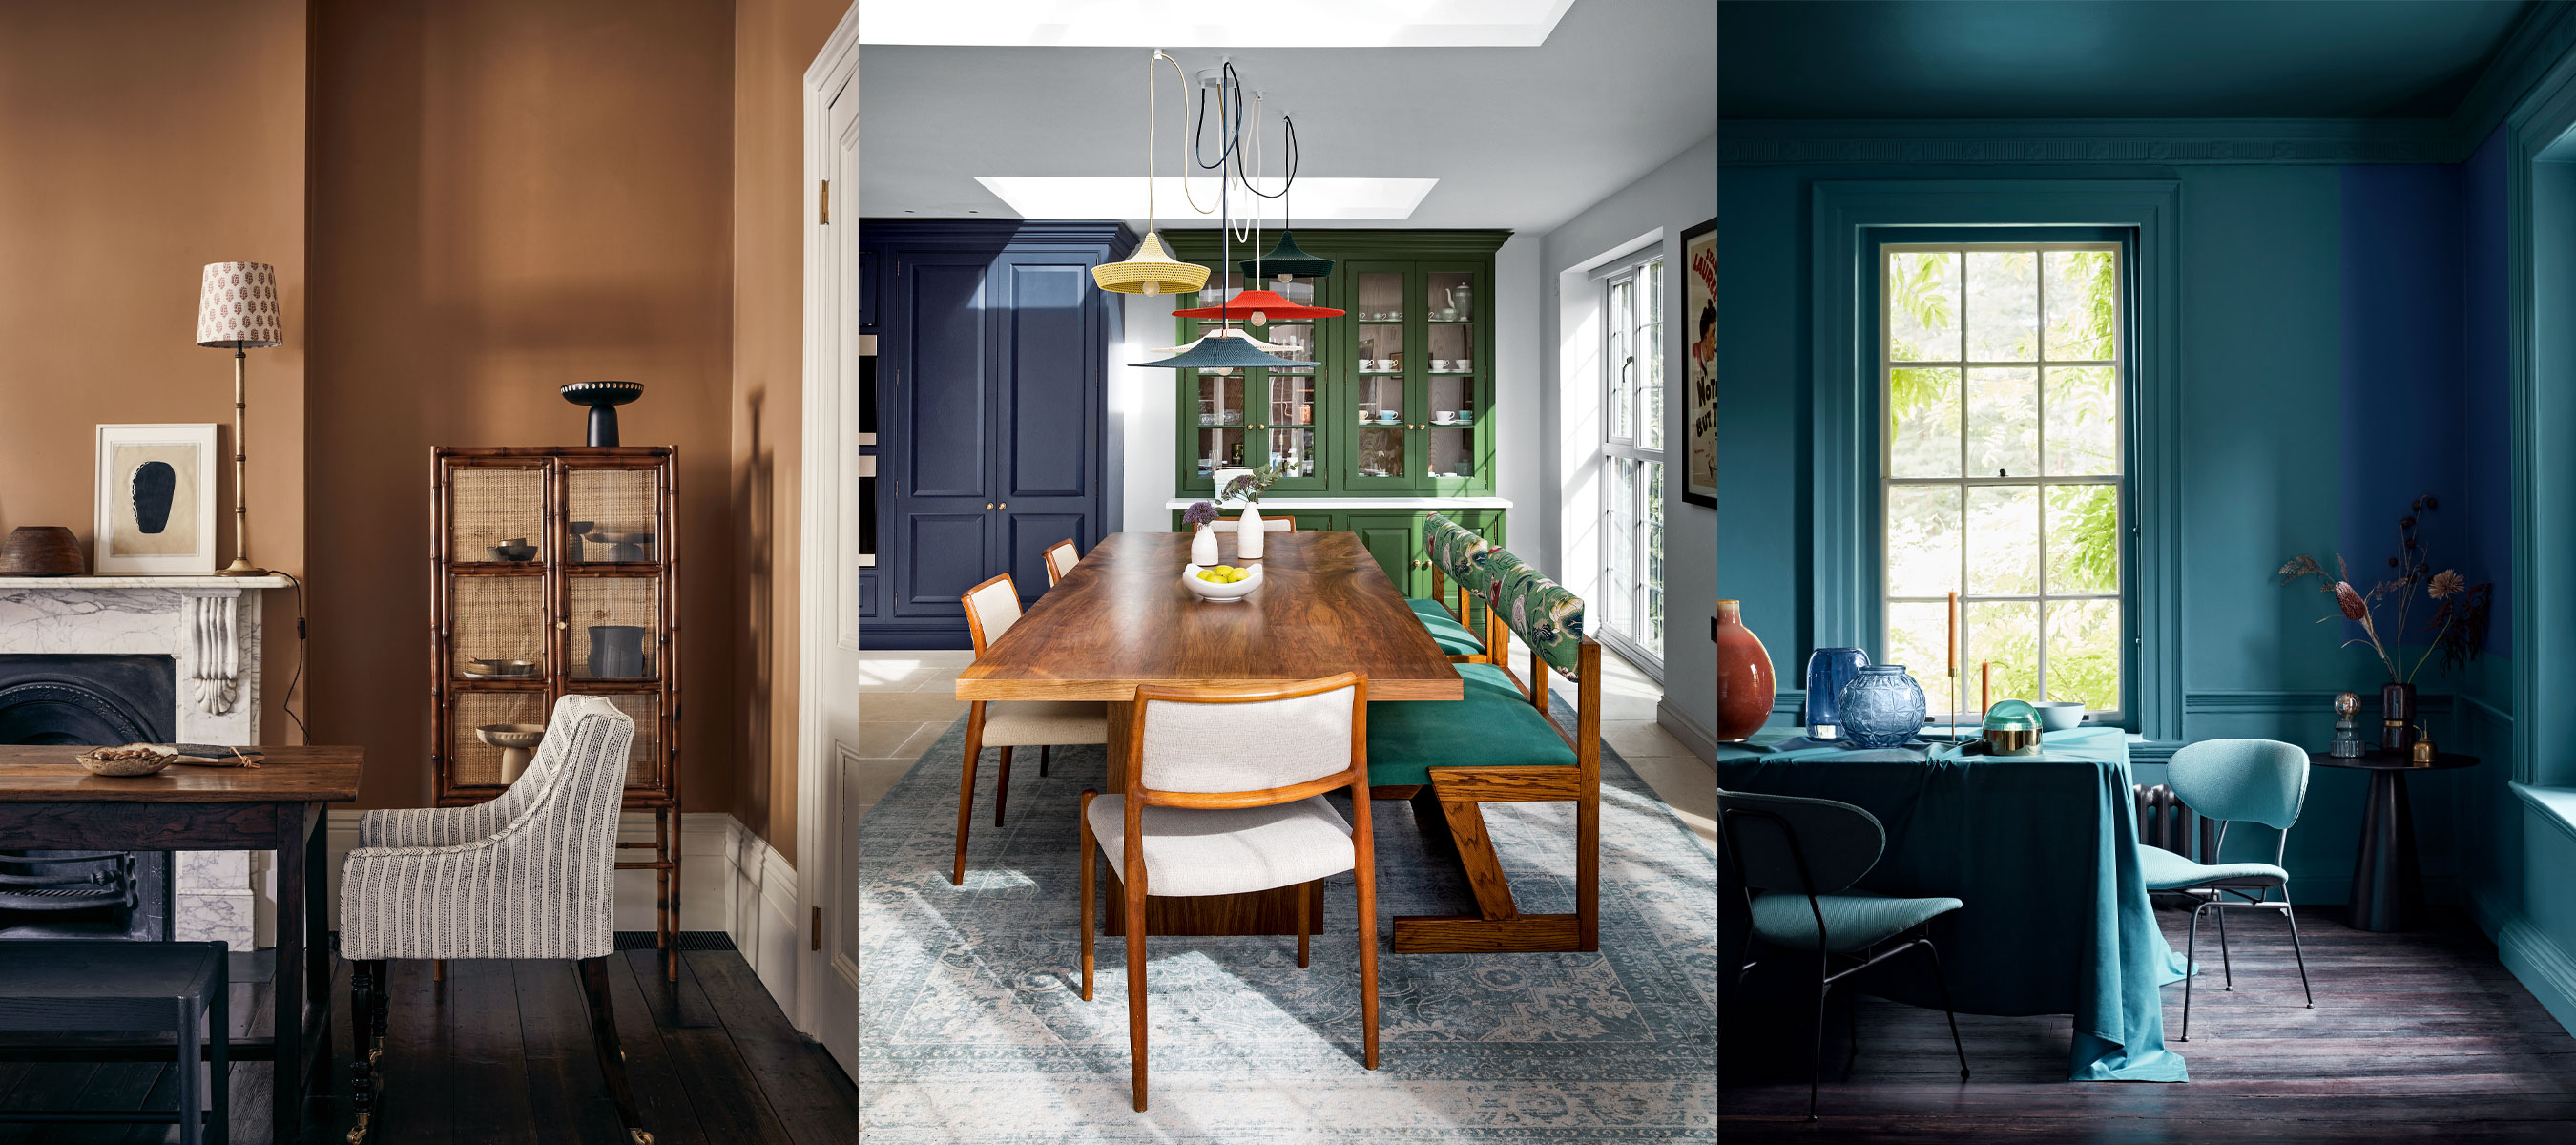 Dining Room Paint Ideas: 13 Paint Colors To Inspire |